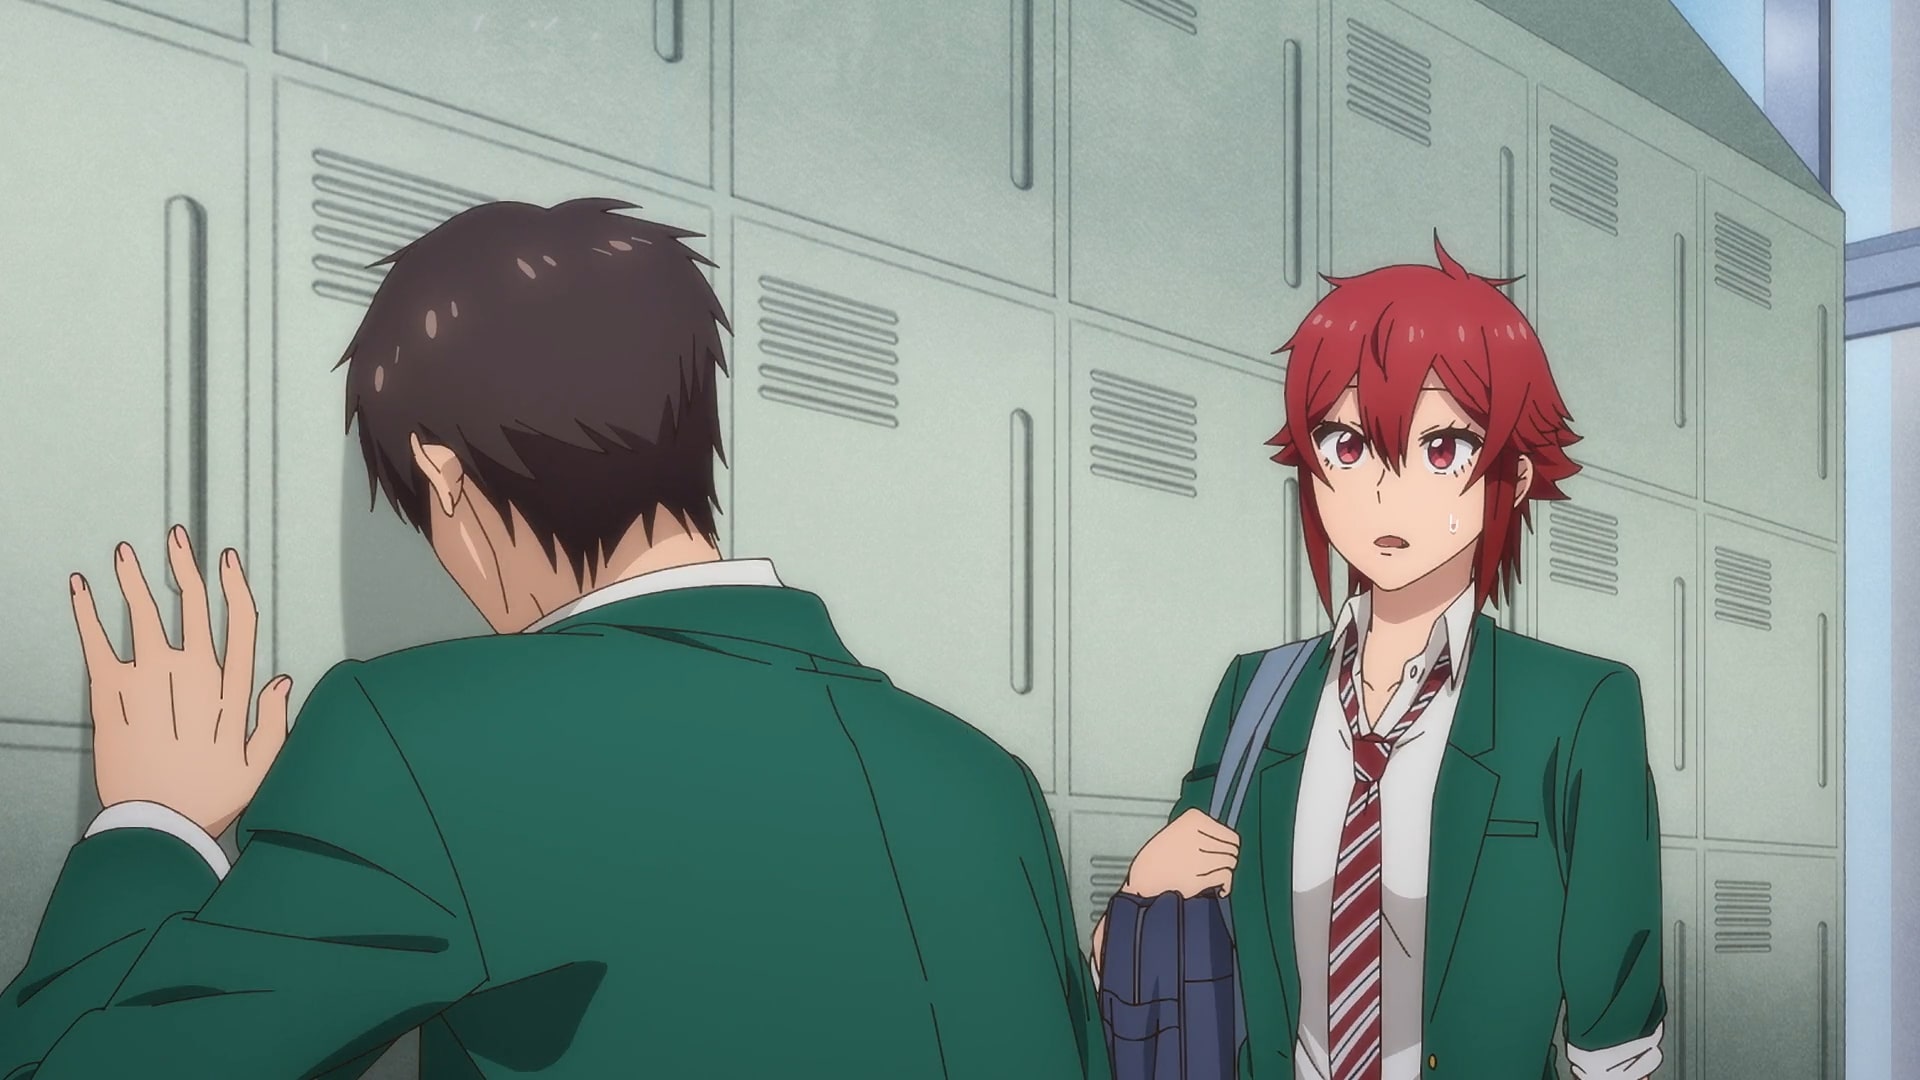 Tomo-Chan Is A Girl Episode 3 Review - But Why Tho?